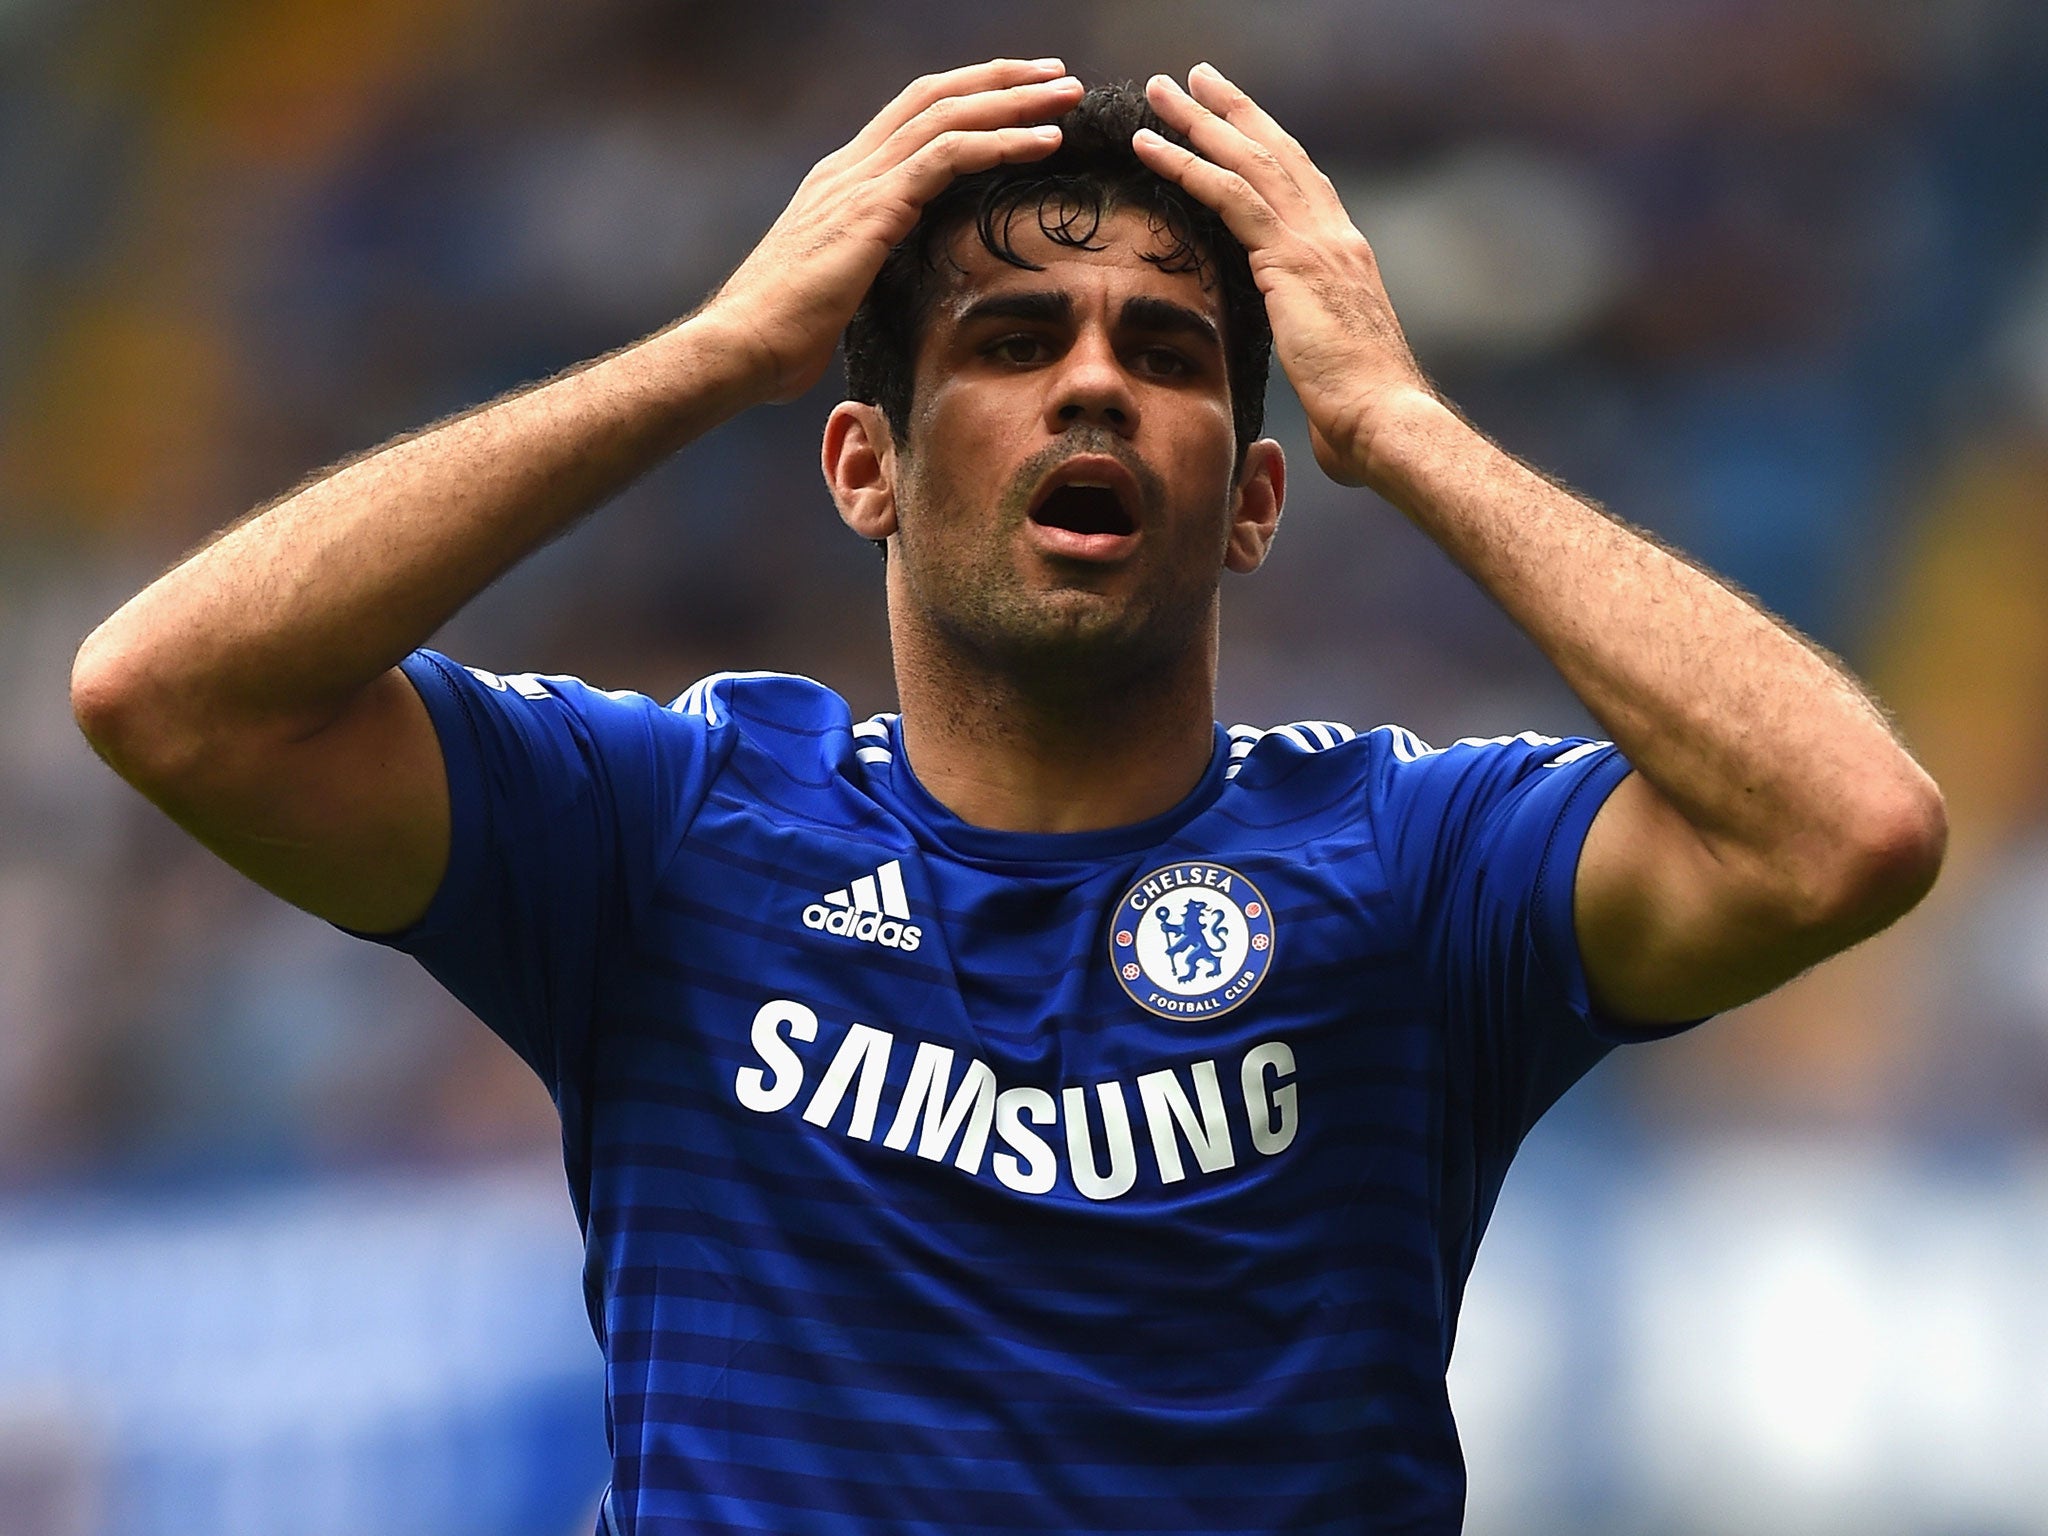 Chelsea striker Diego Costa could face United on Sunday